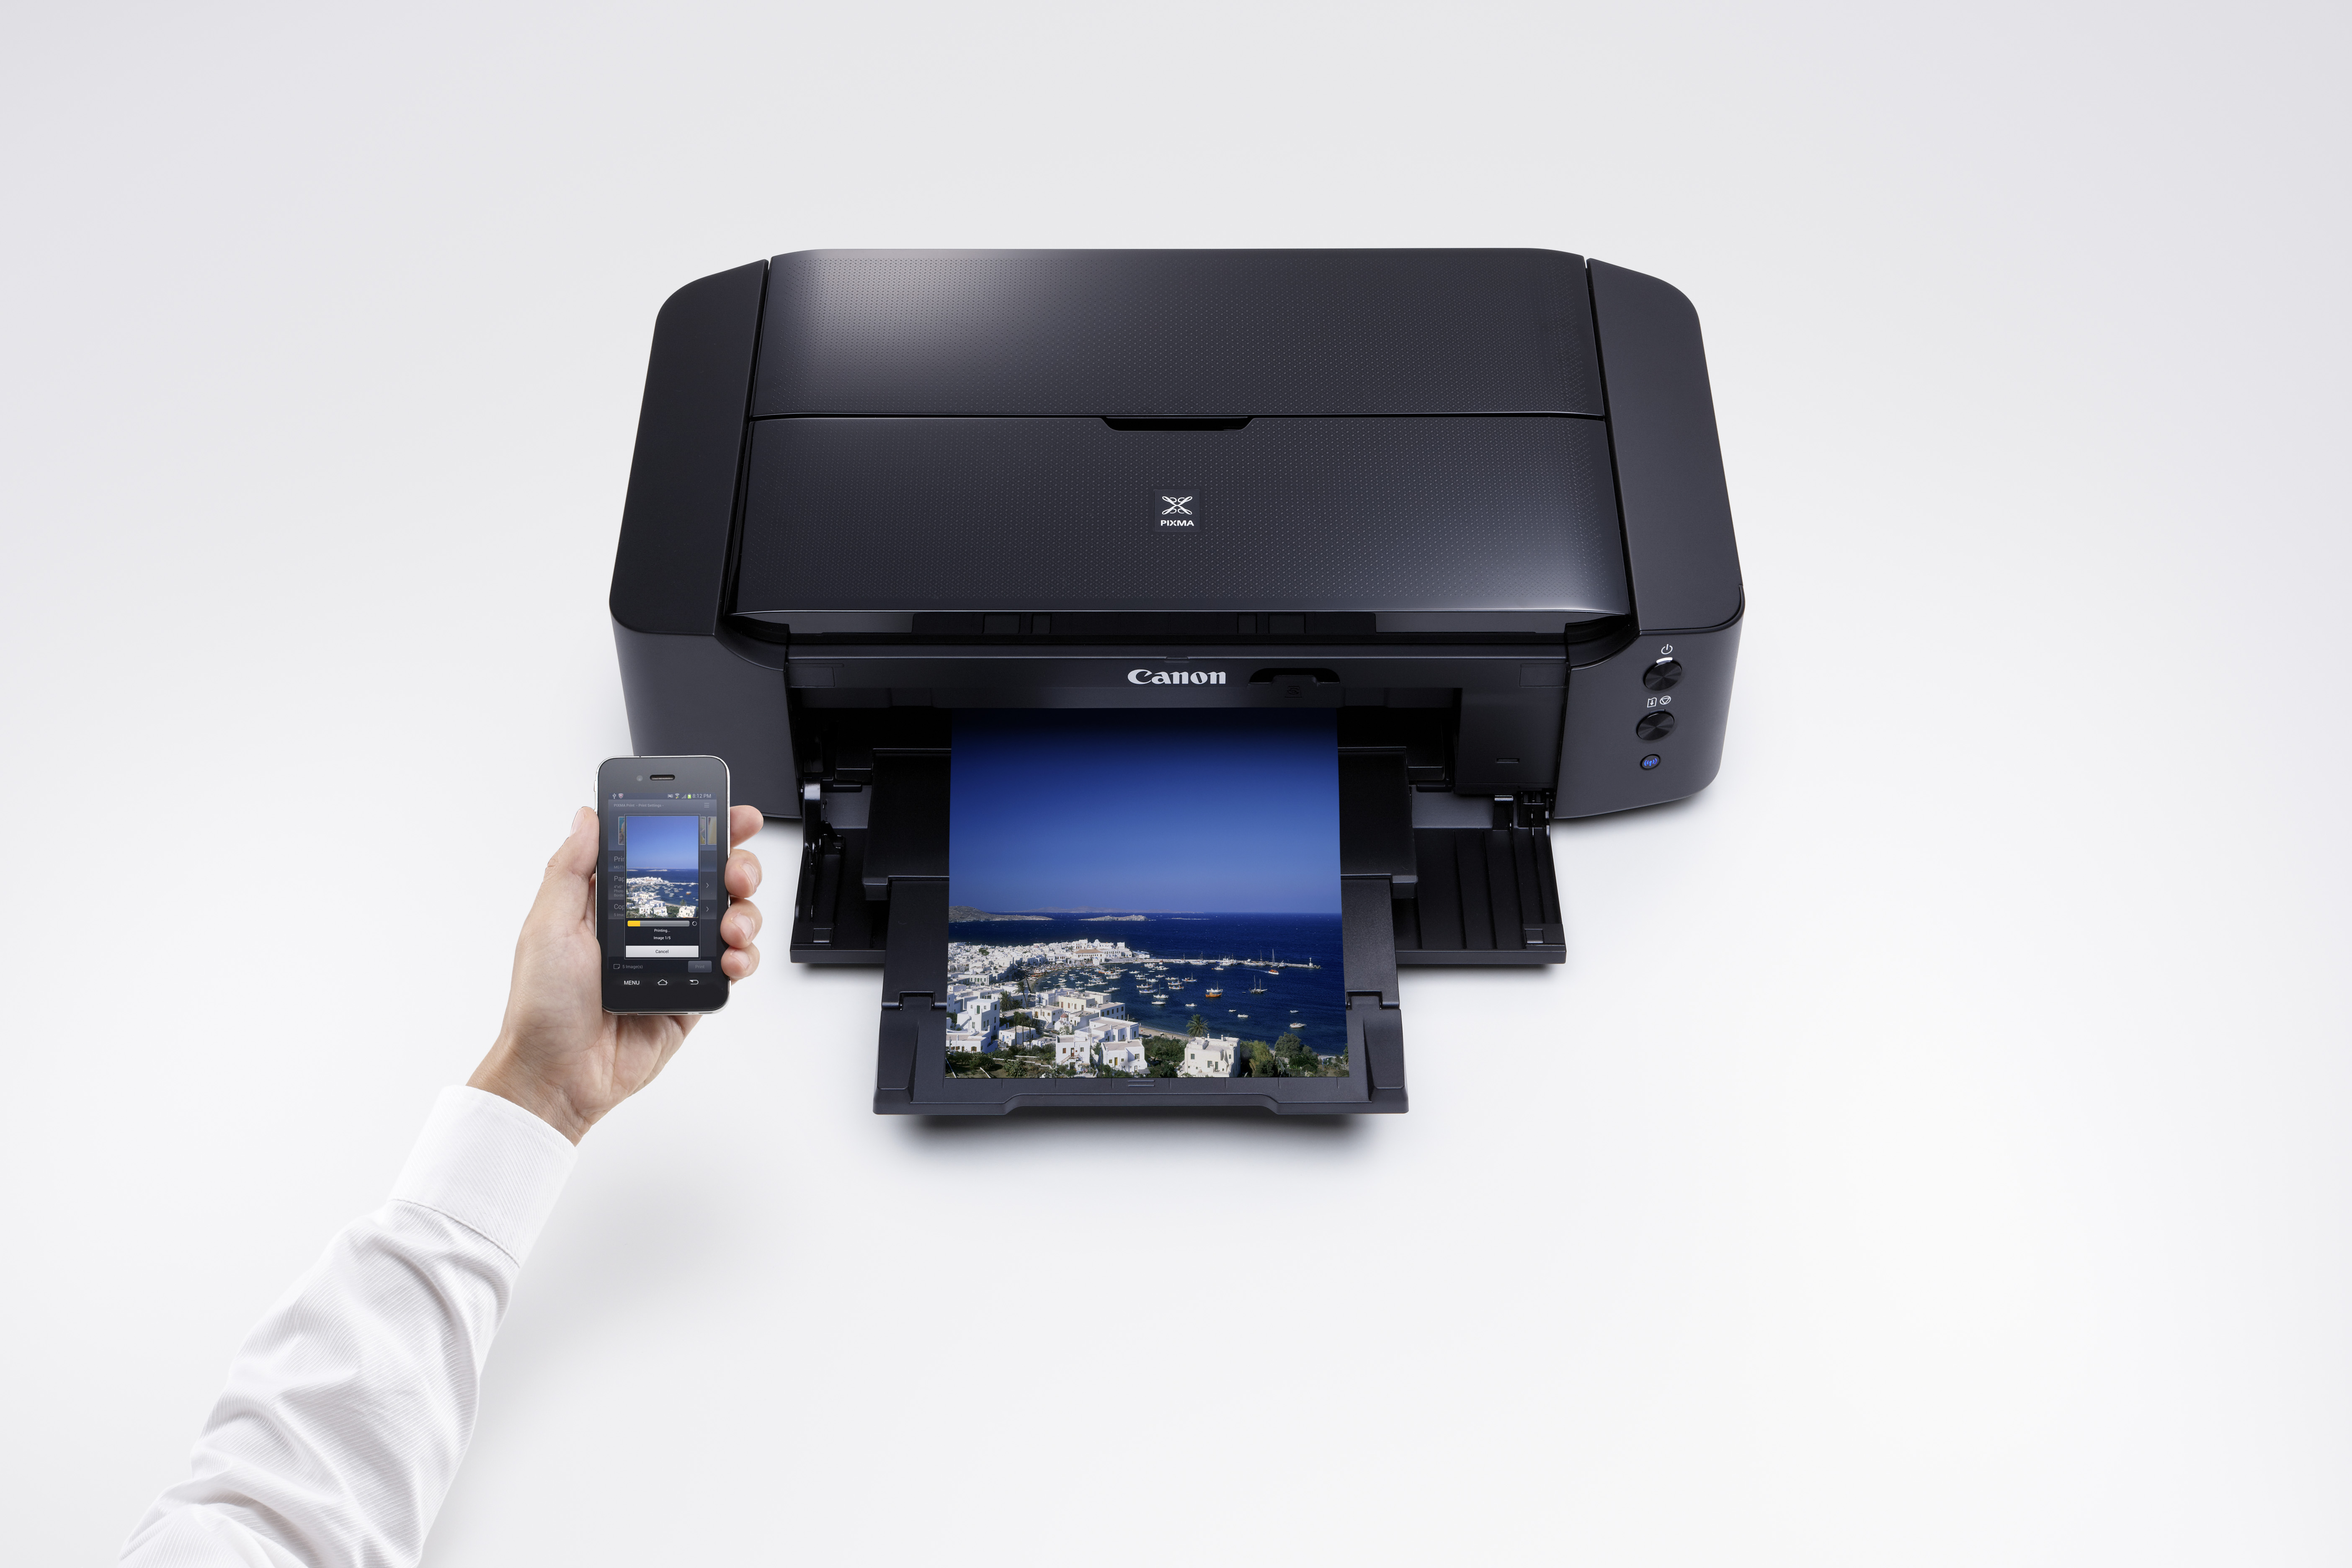 Smart print from your device